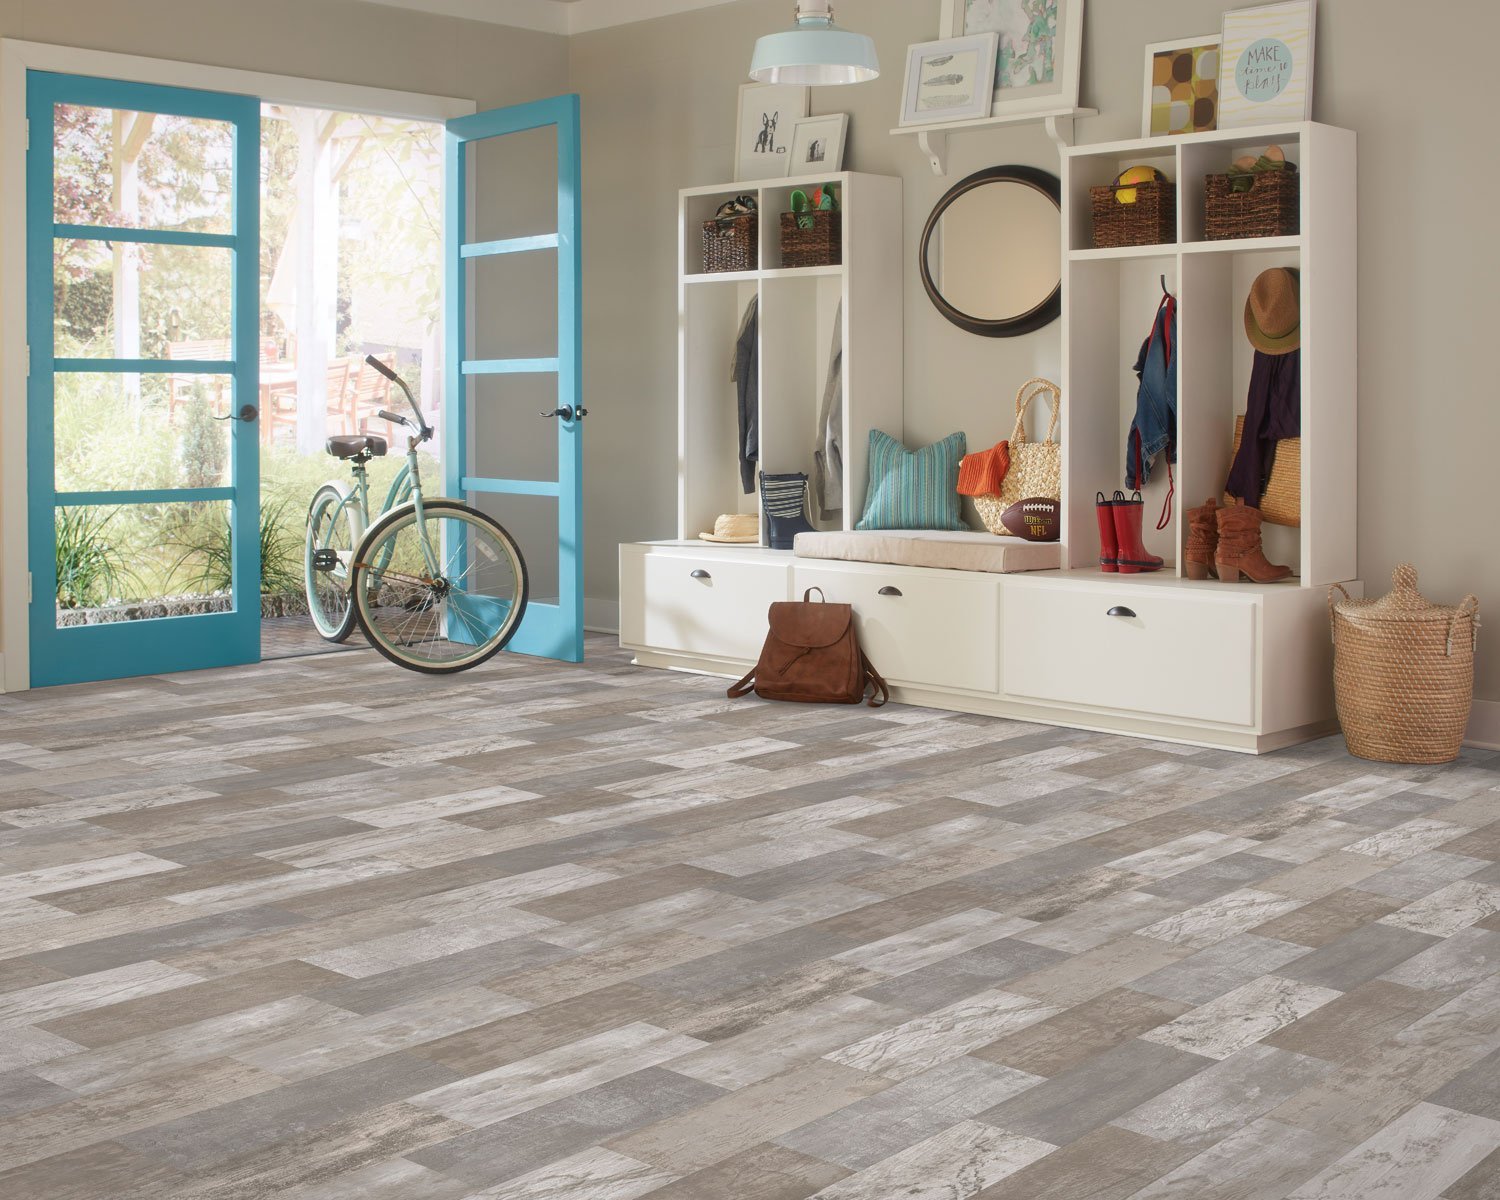 Why luxury vinyl flooring is ideal for pet-friendly homes